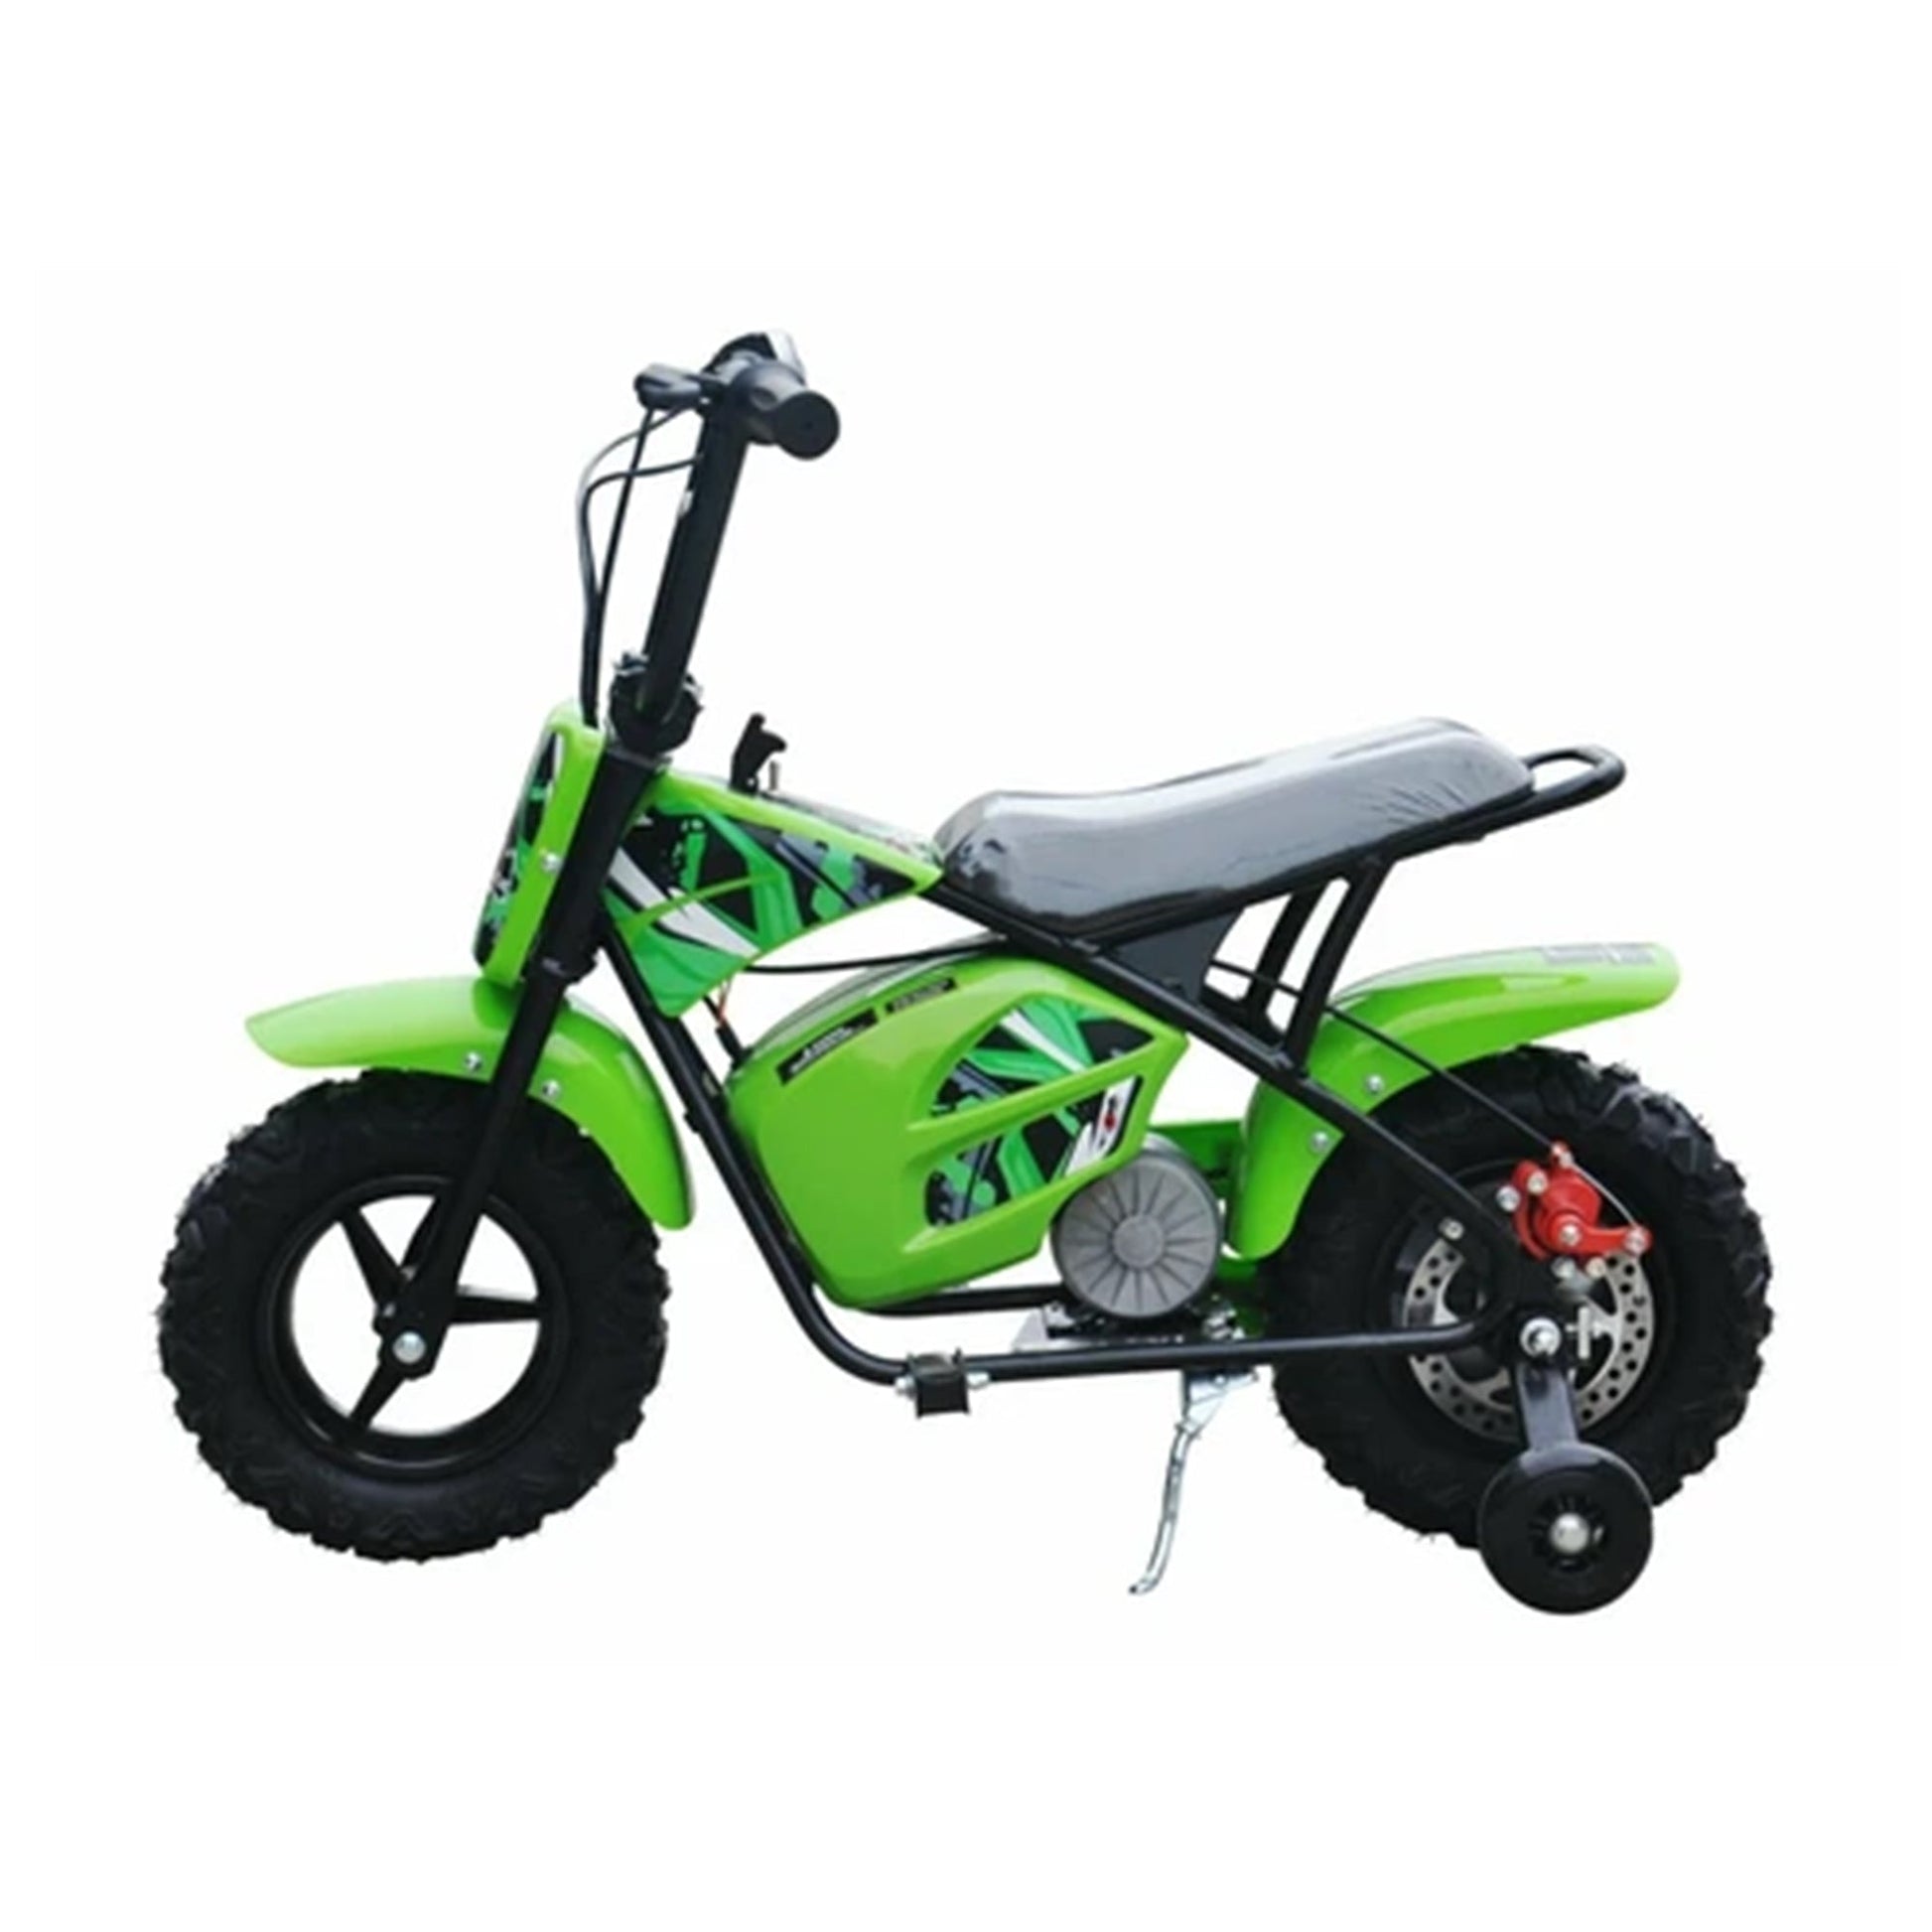 "Green Mini Dirtbike Scrambler for Kids, Electric Ride-On, 250 Watt and 12 Volt with Twist and Go Throttle, Brushless Motor on White Background."